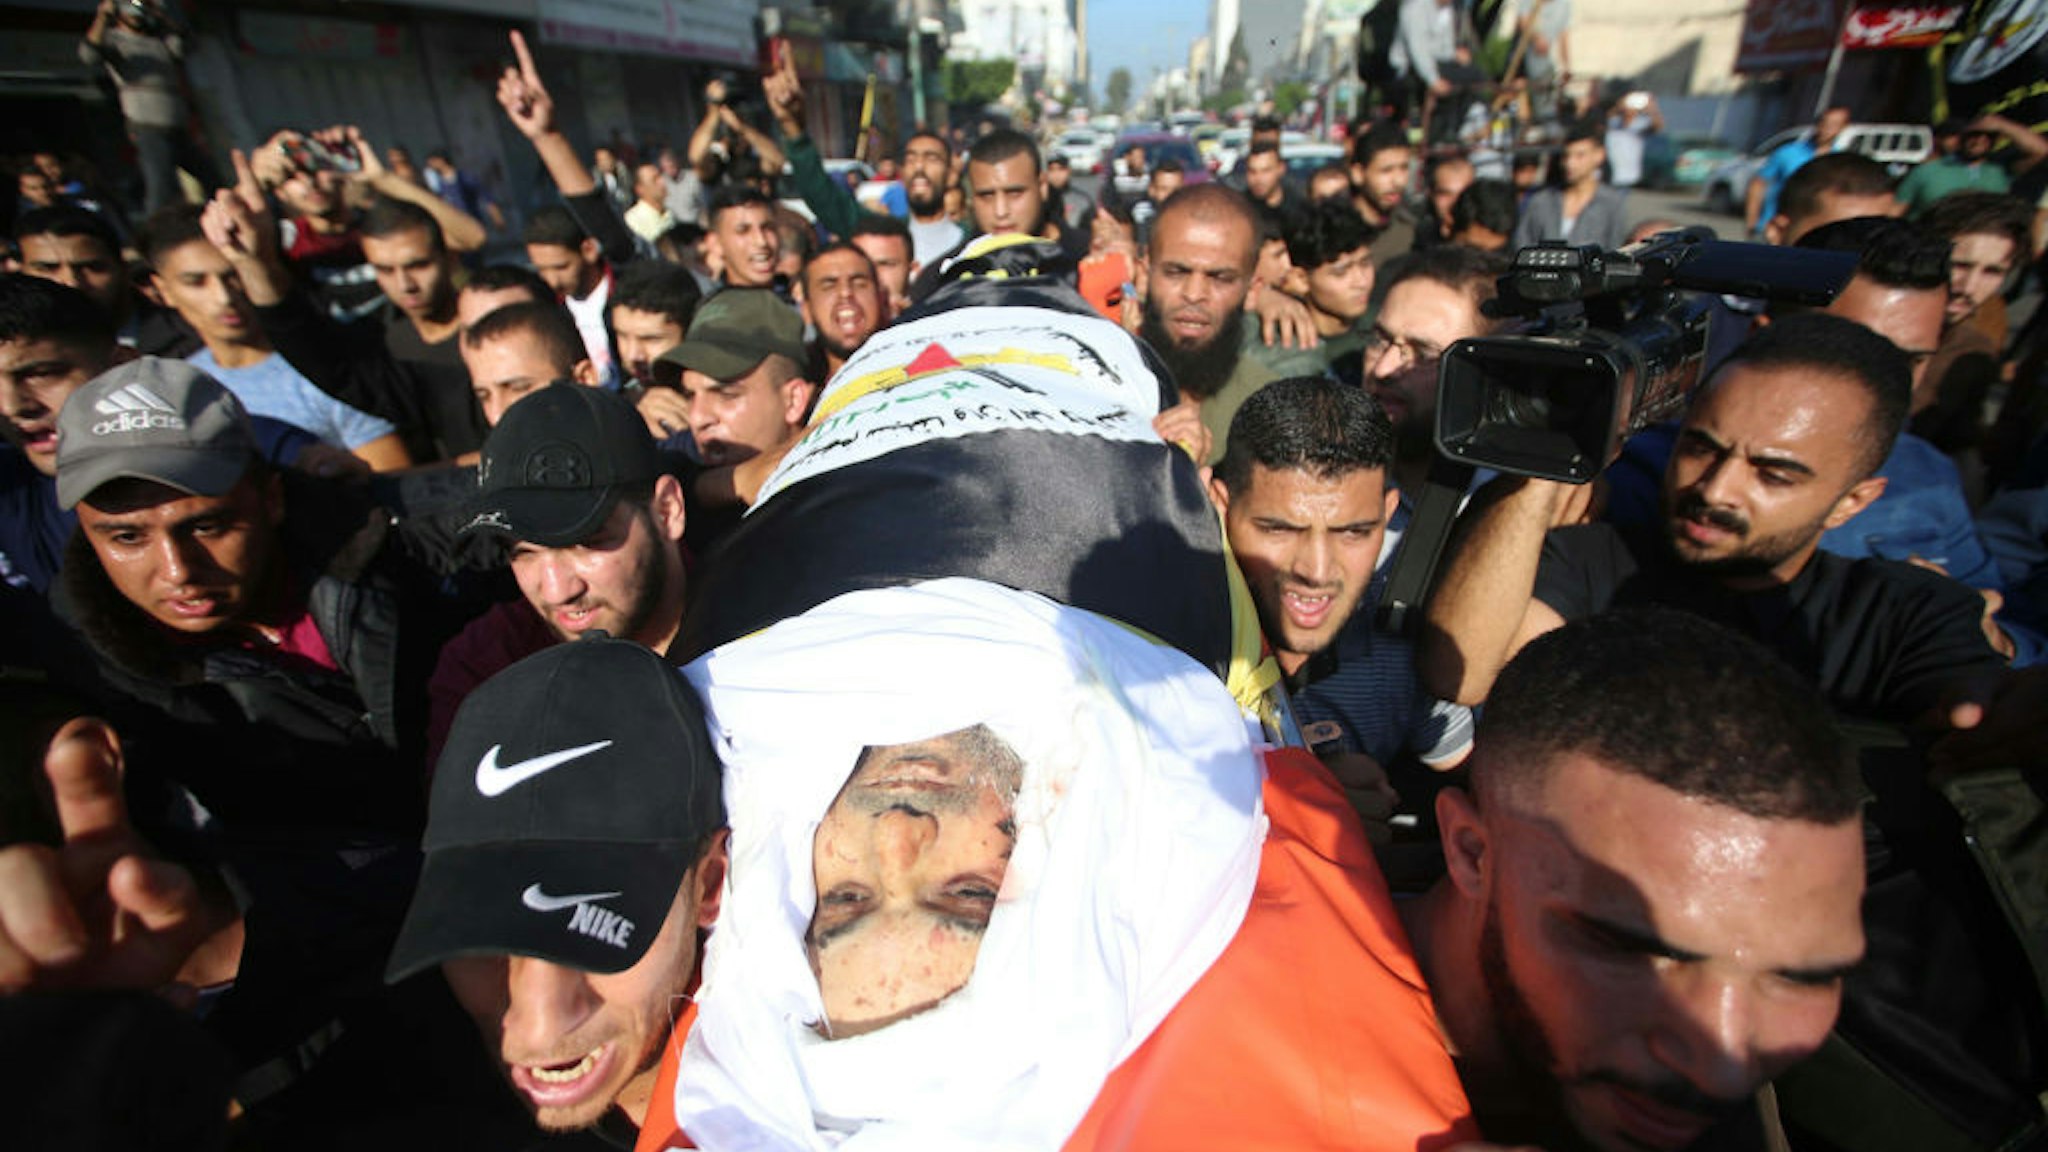 Mourners chant slogans as they carry the body of Palestinian Islamic Jihad senior leader Baha Abu Al-Ata during his funeral in Gaza City on November 12, 2019.